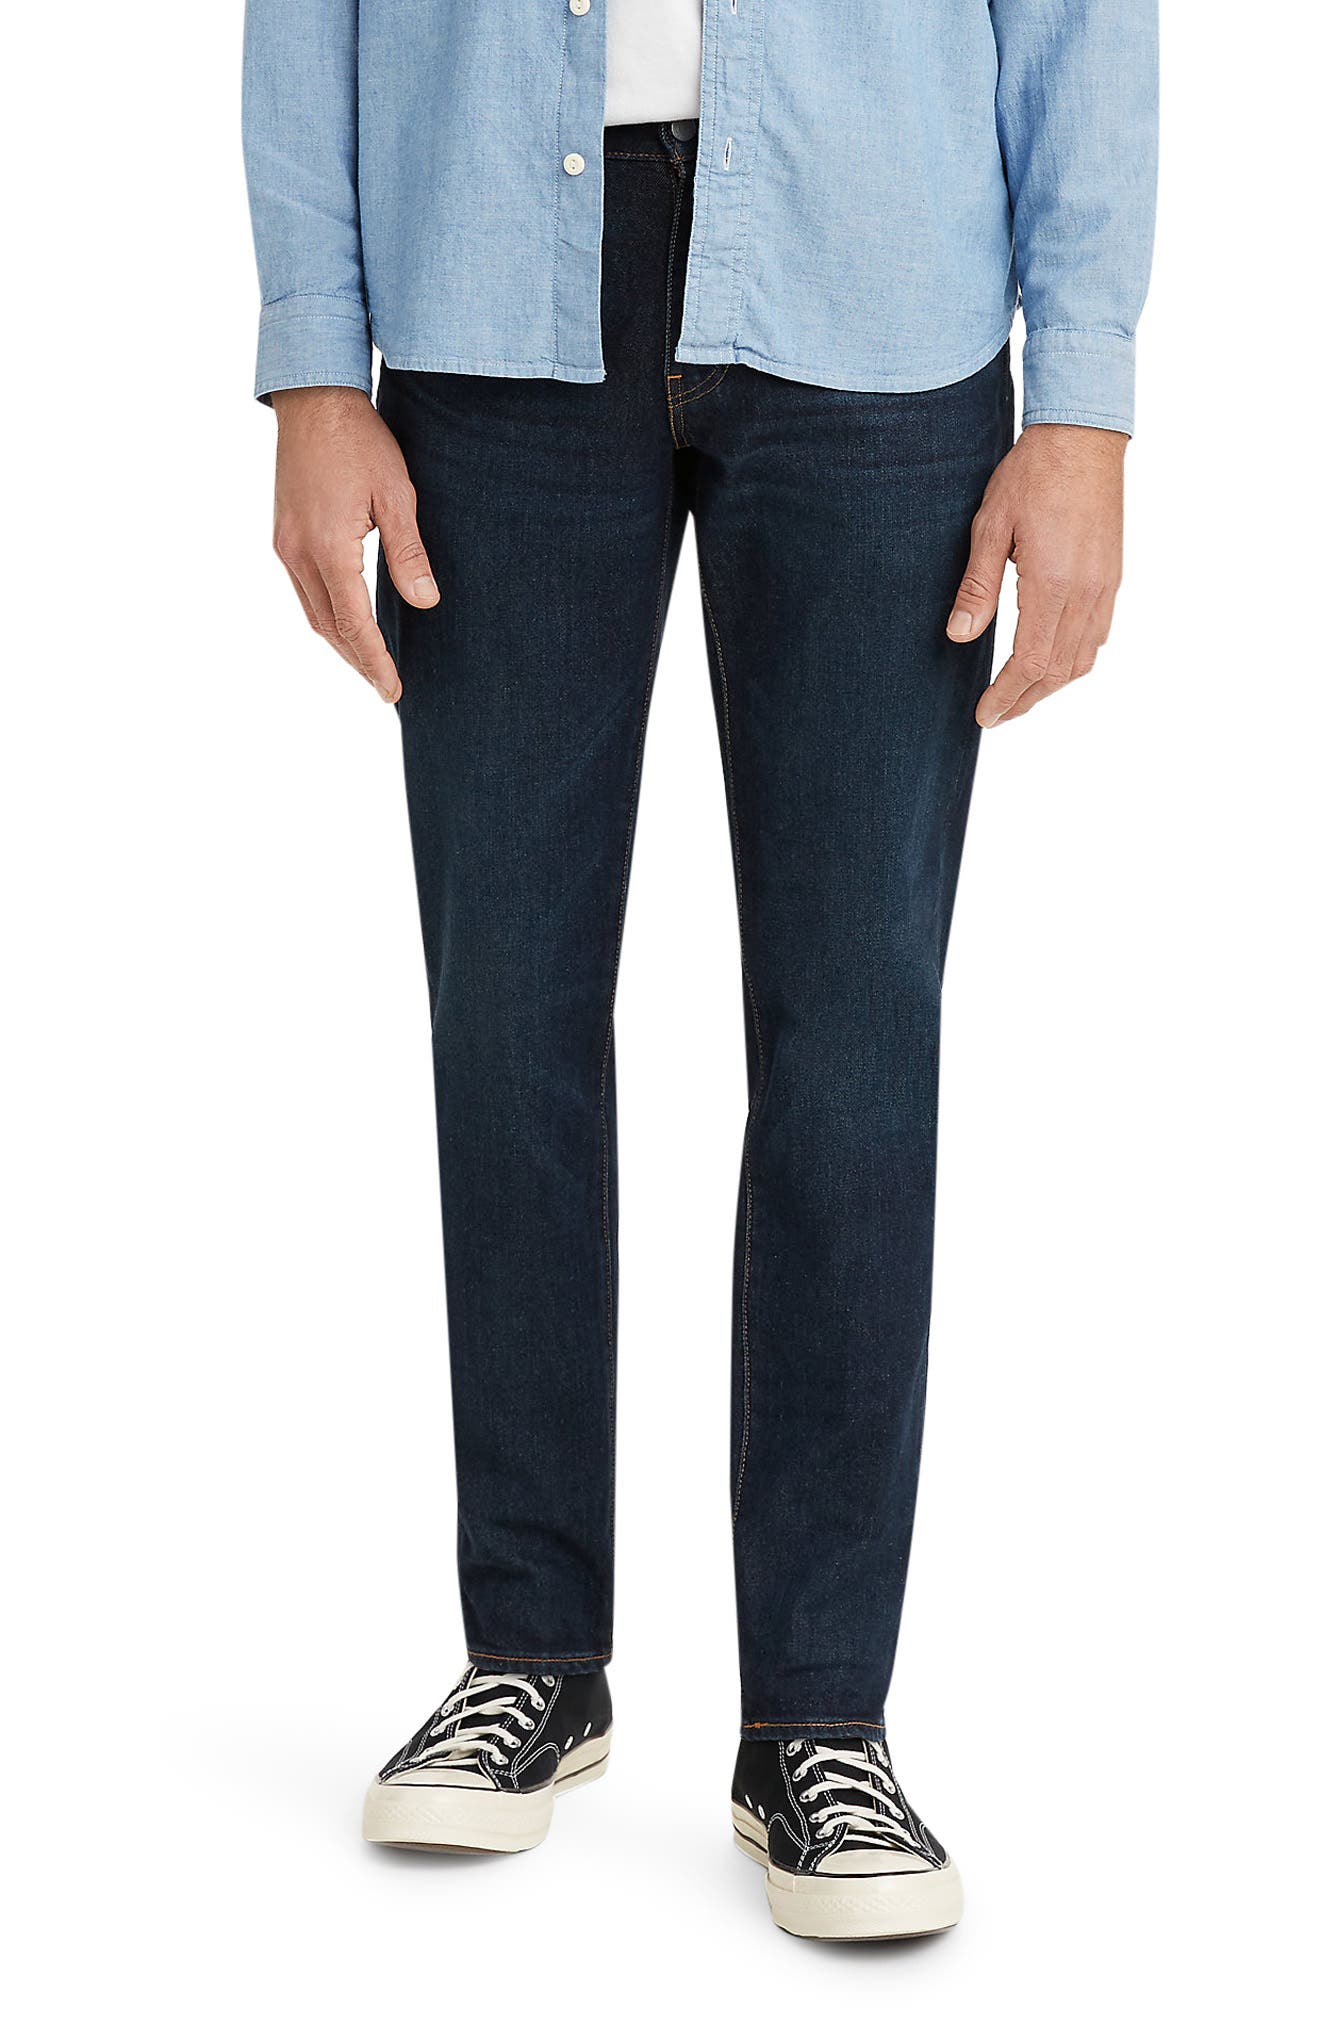 levi's athletic fit stretch jeans